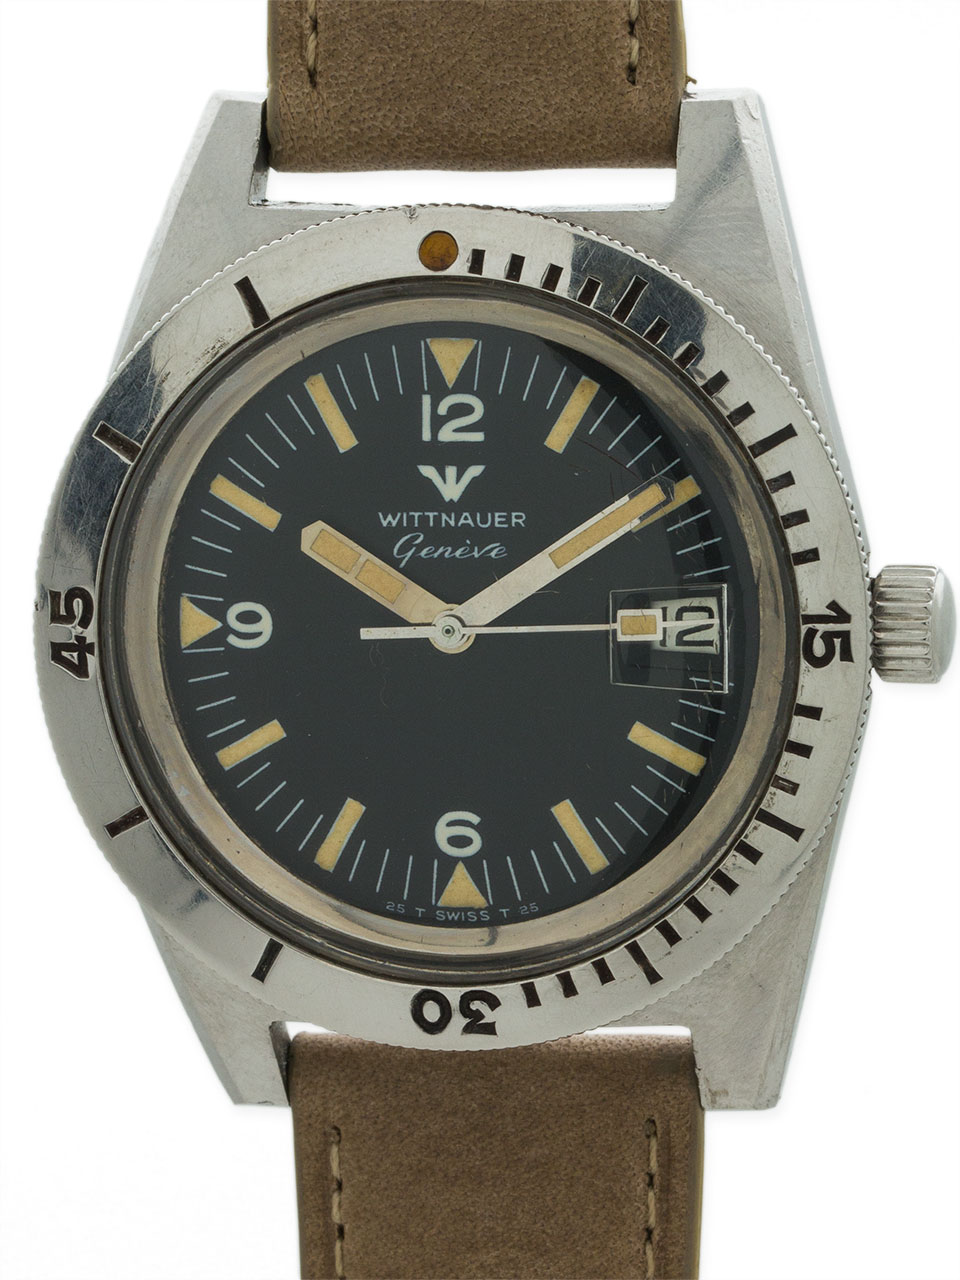 Wittnauer Diver’s Stainless Steel circa 1960’s